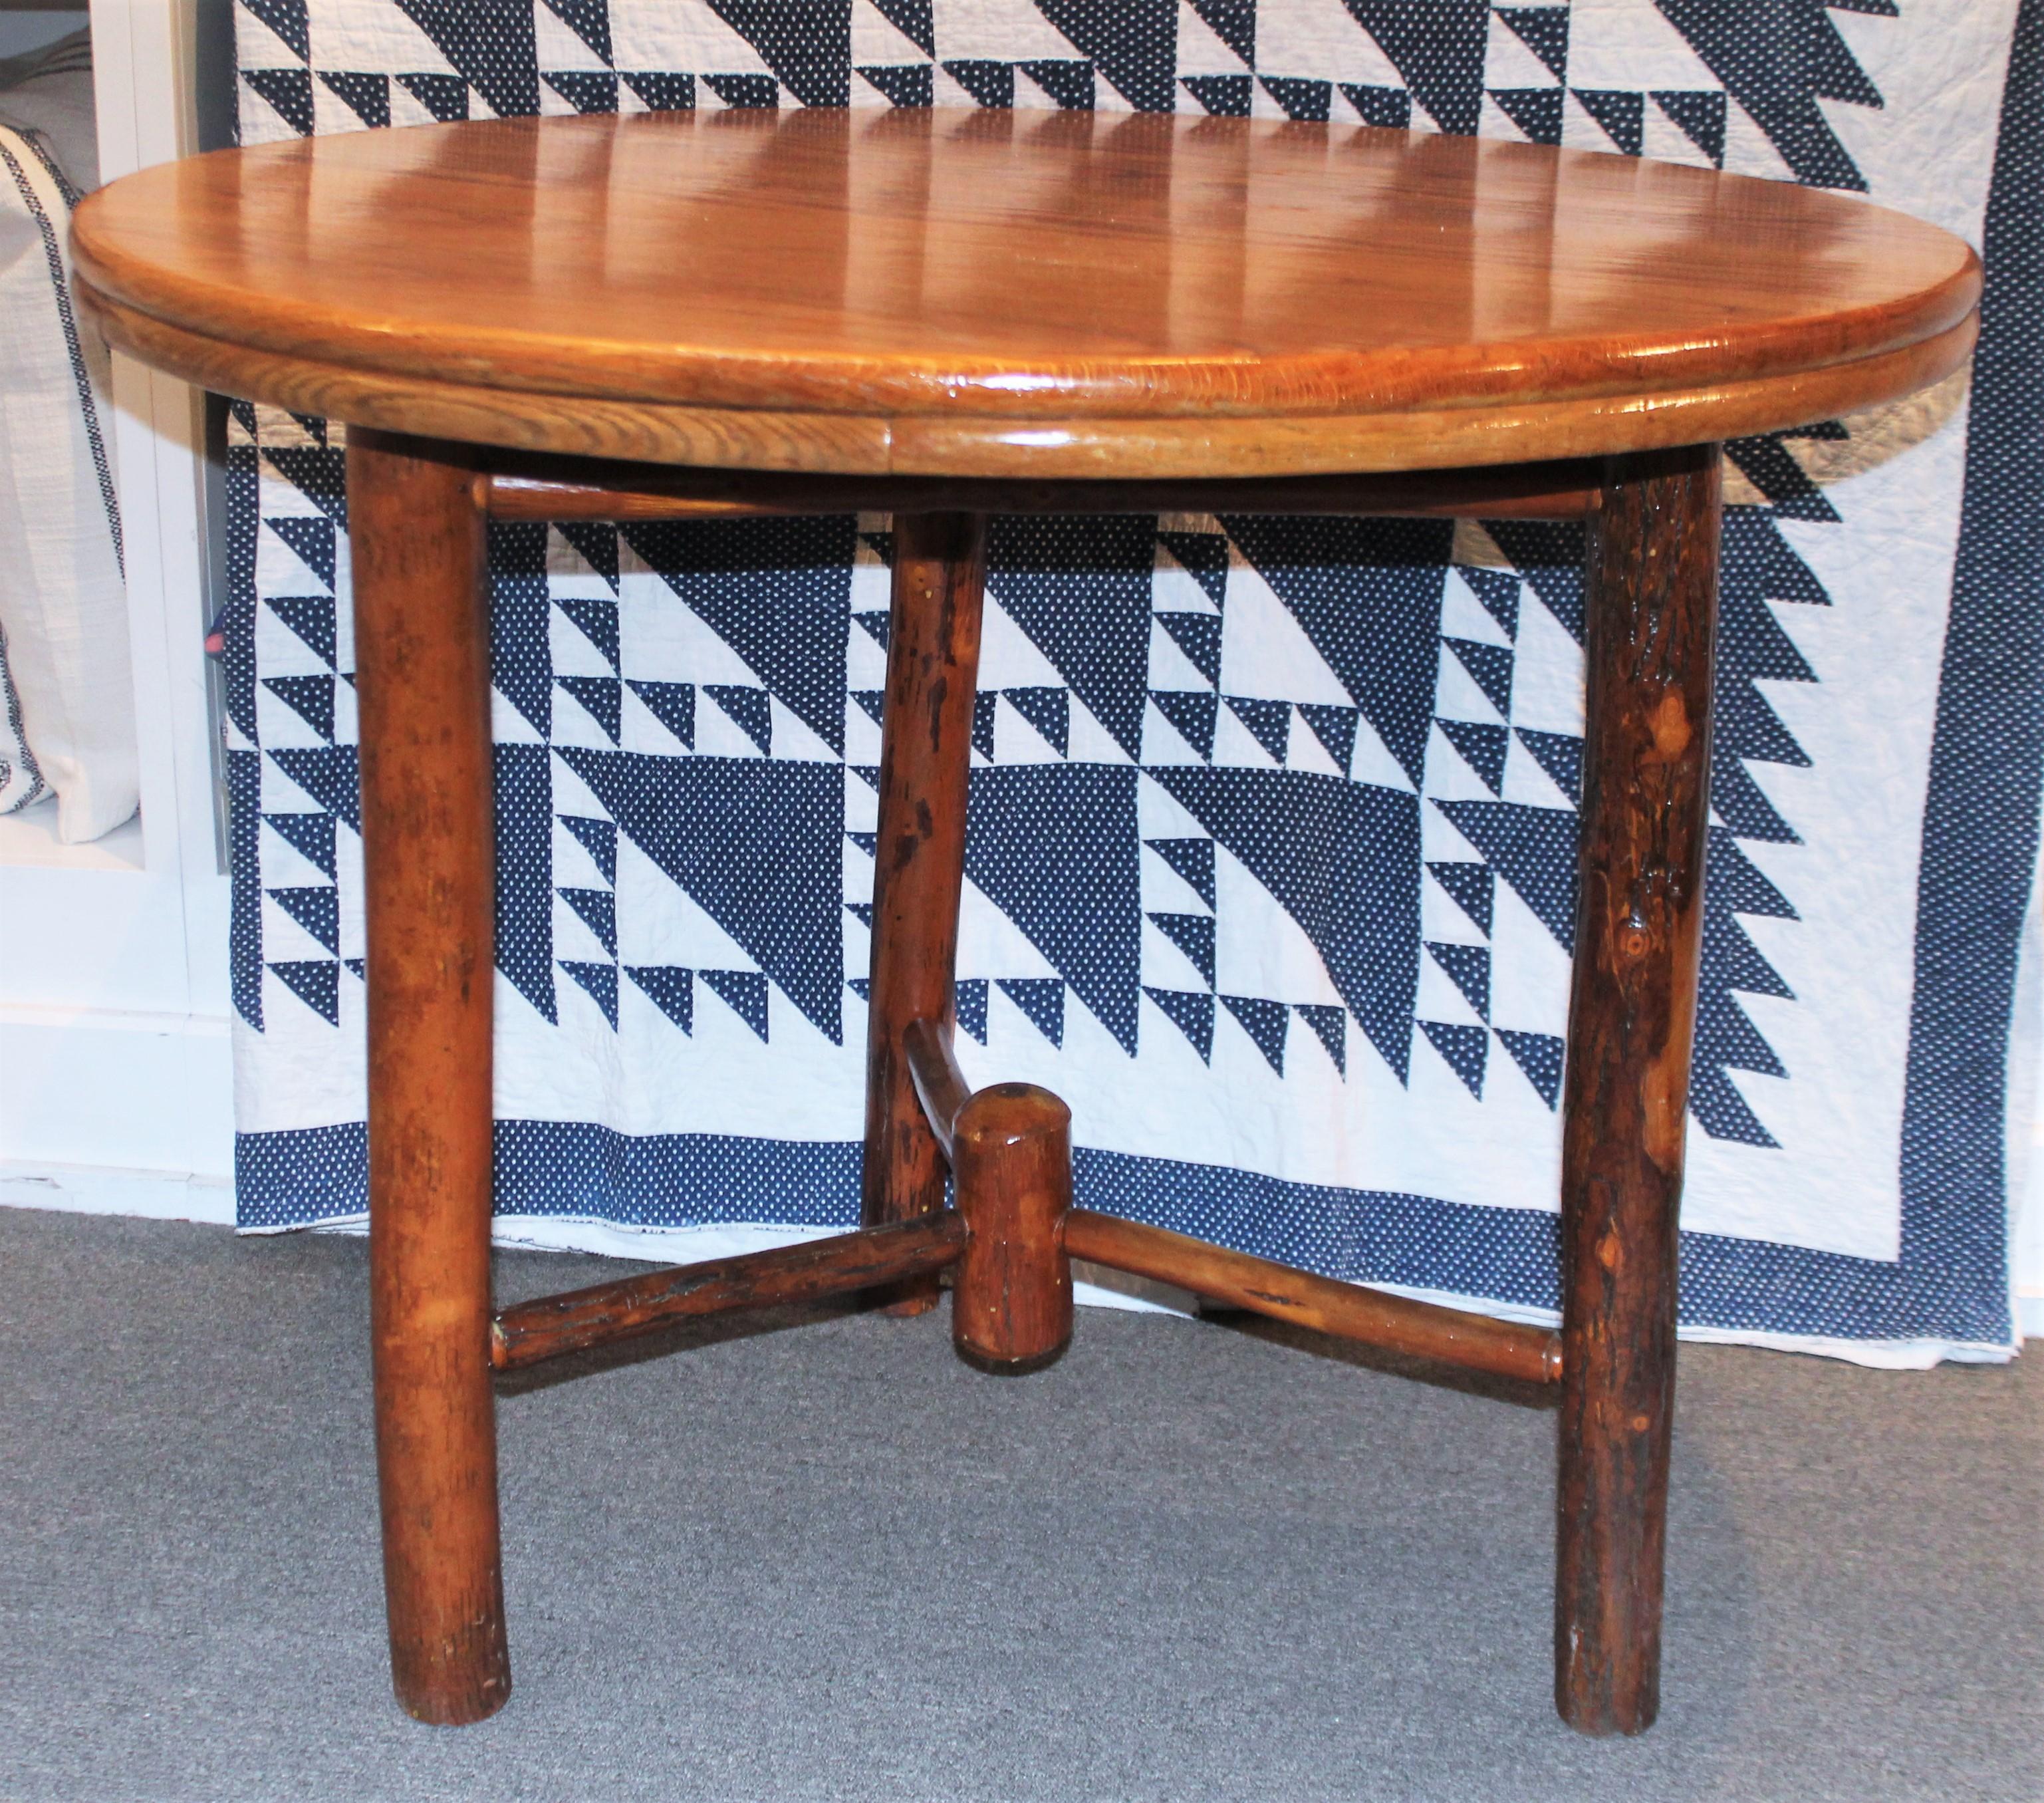 Early 20th century round hickory dining table. Old hickory manufacture. Has been sealed to protect wood from all weather. This item has been checked for strength and stability.